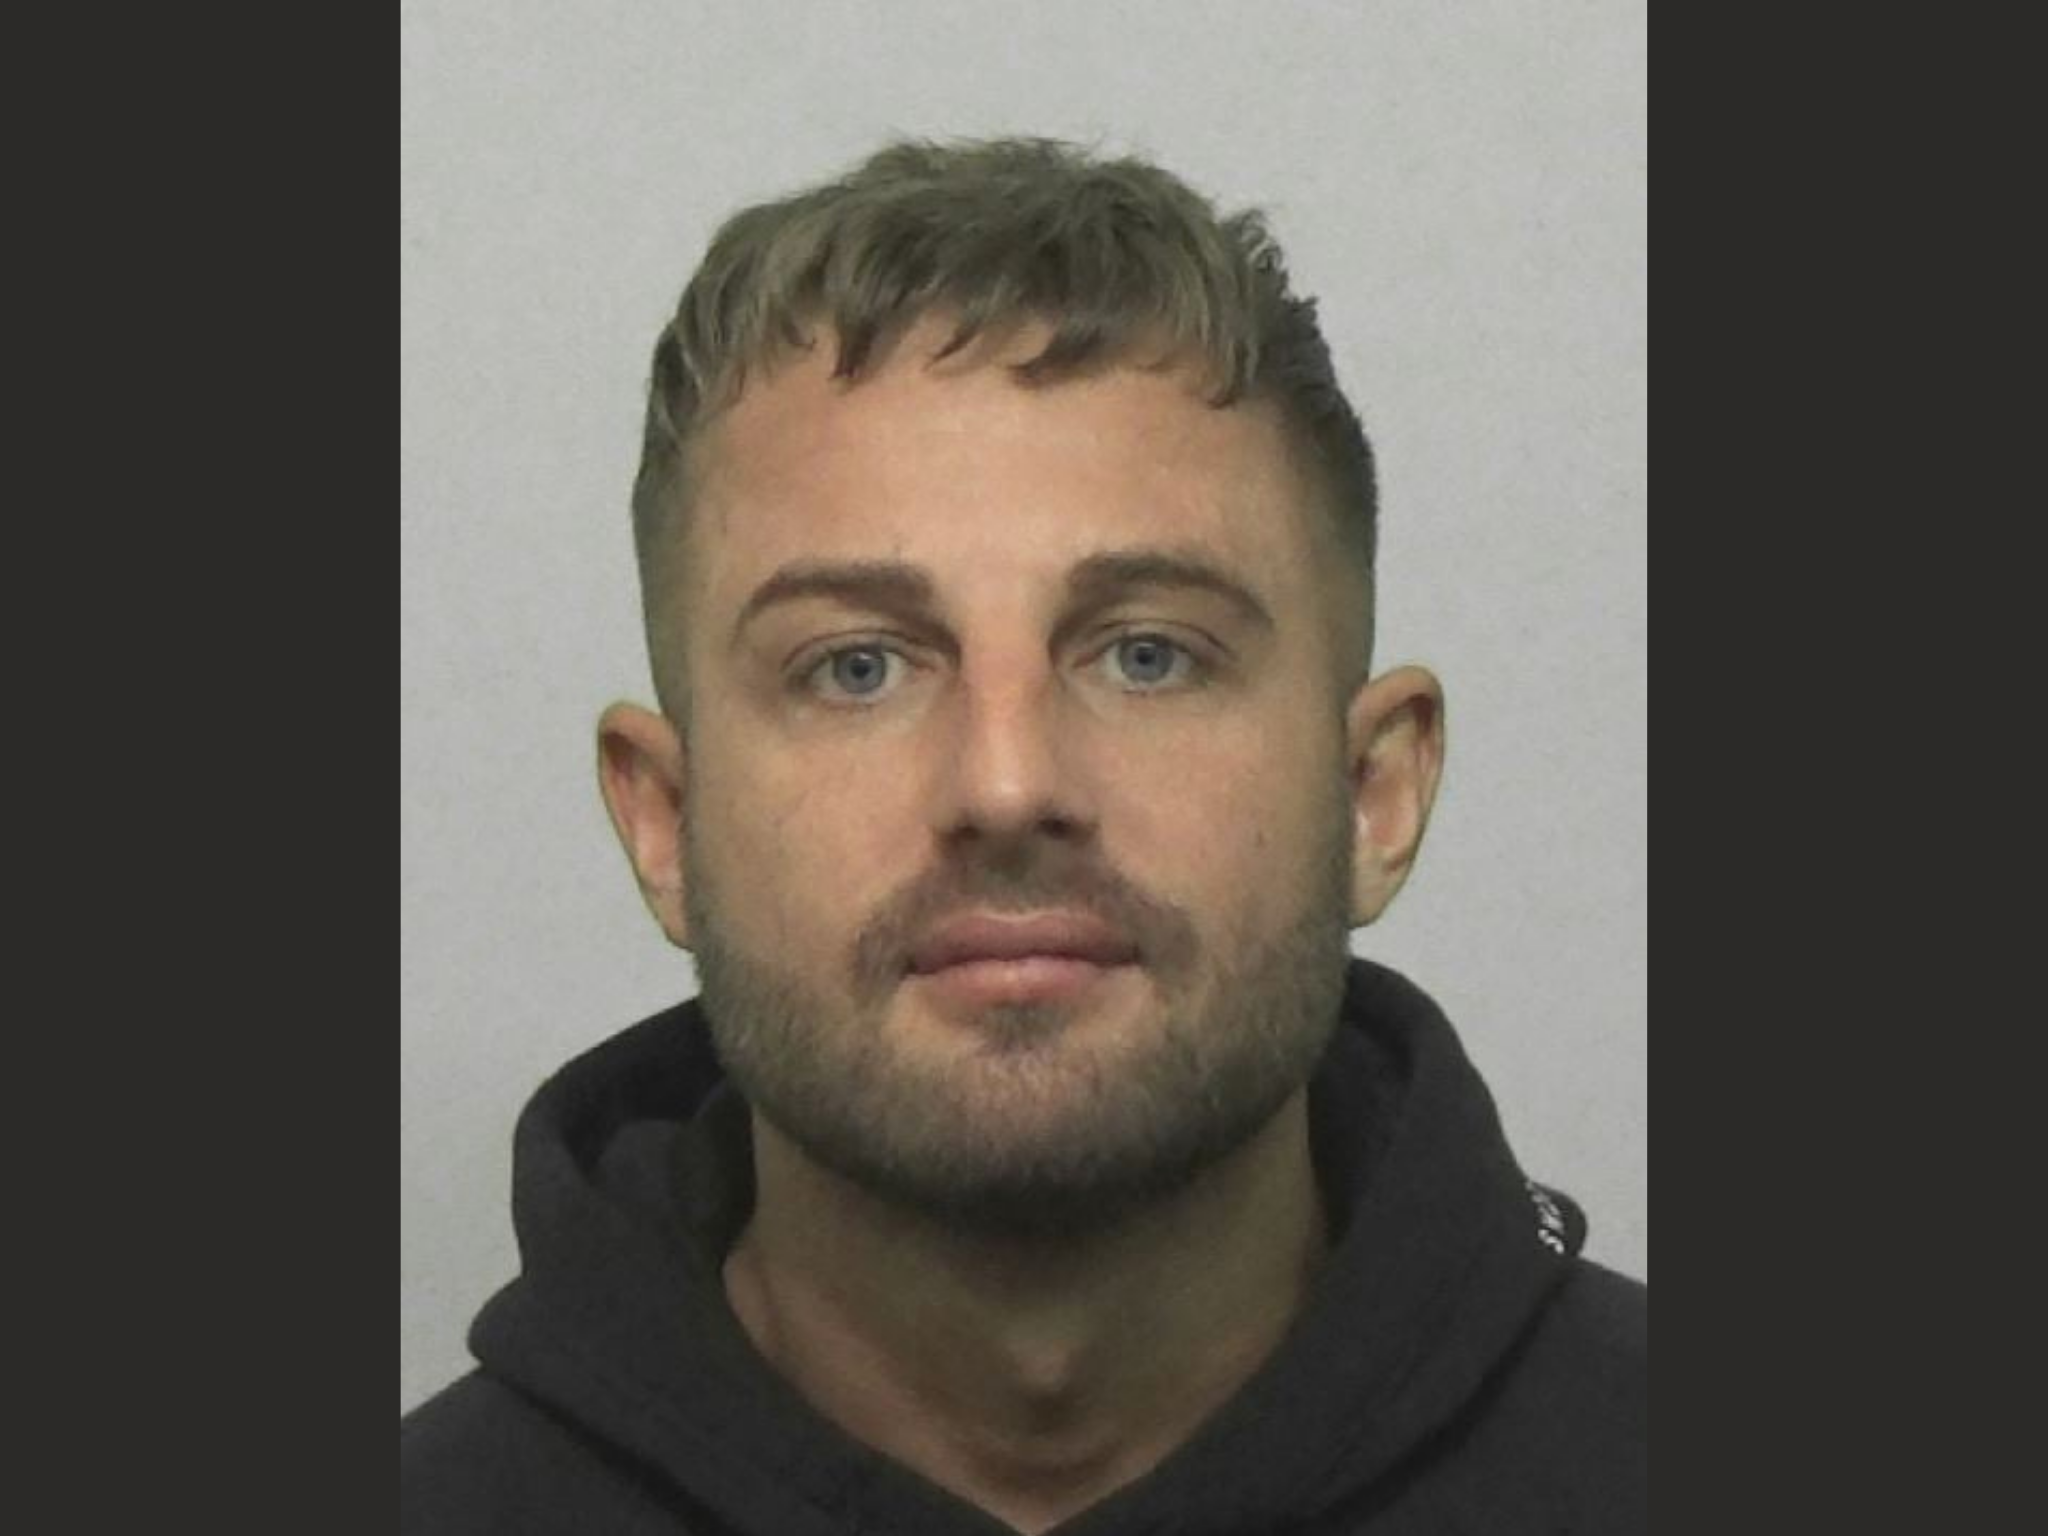 Aaron Stephenson has offered to double a police reward for anyone who helps him to hide